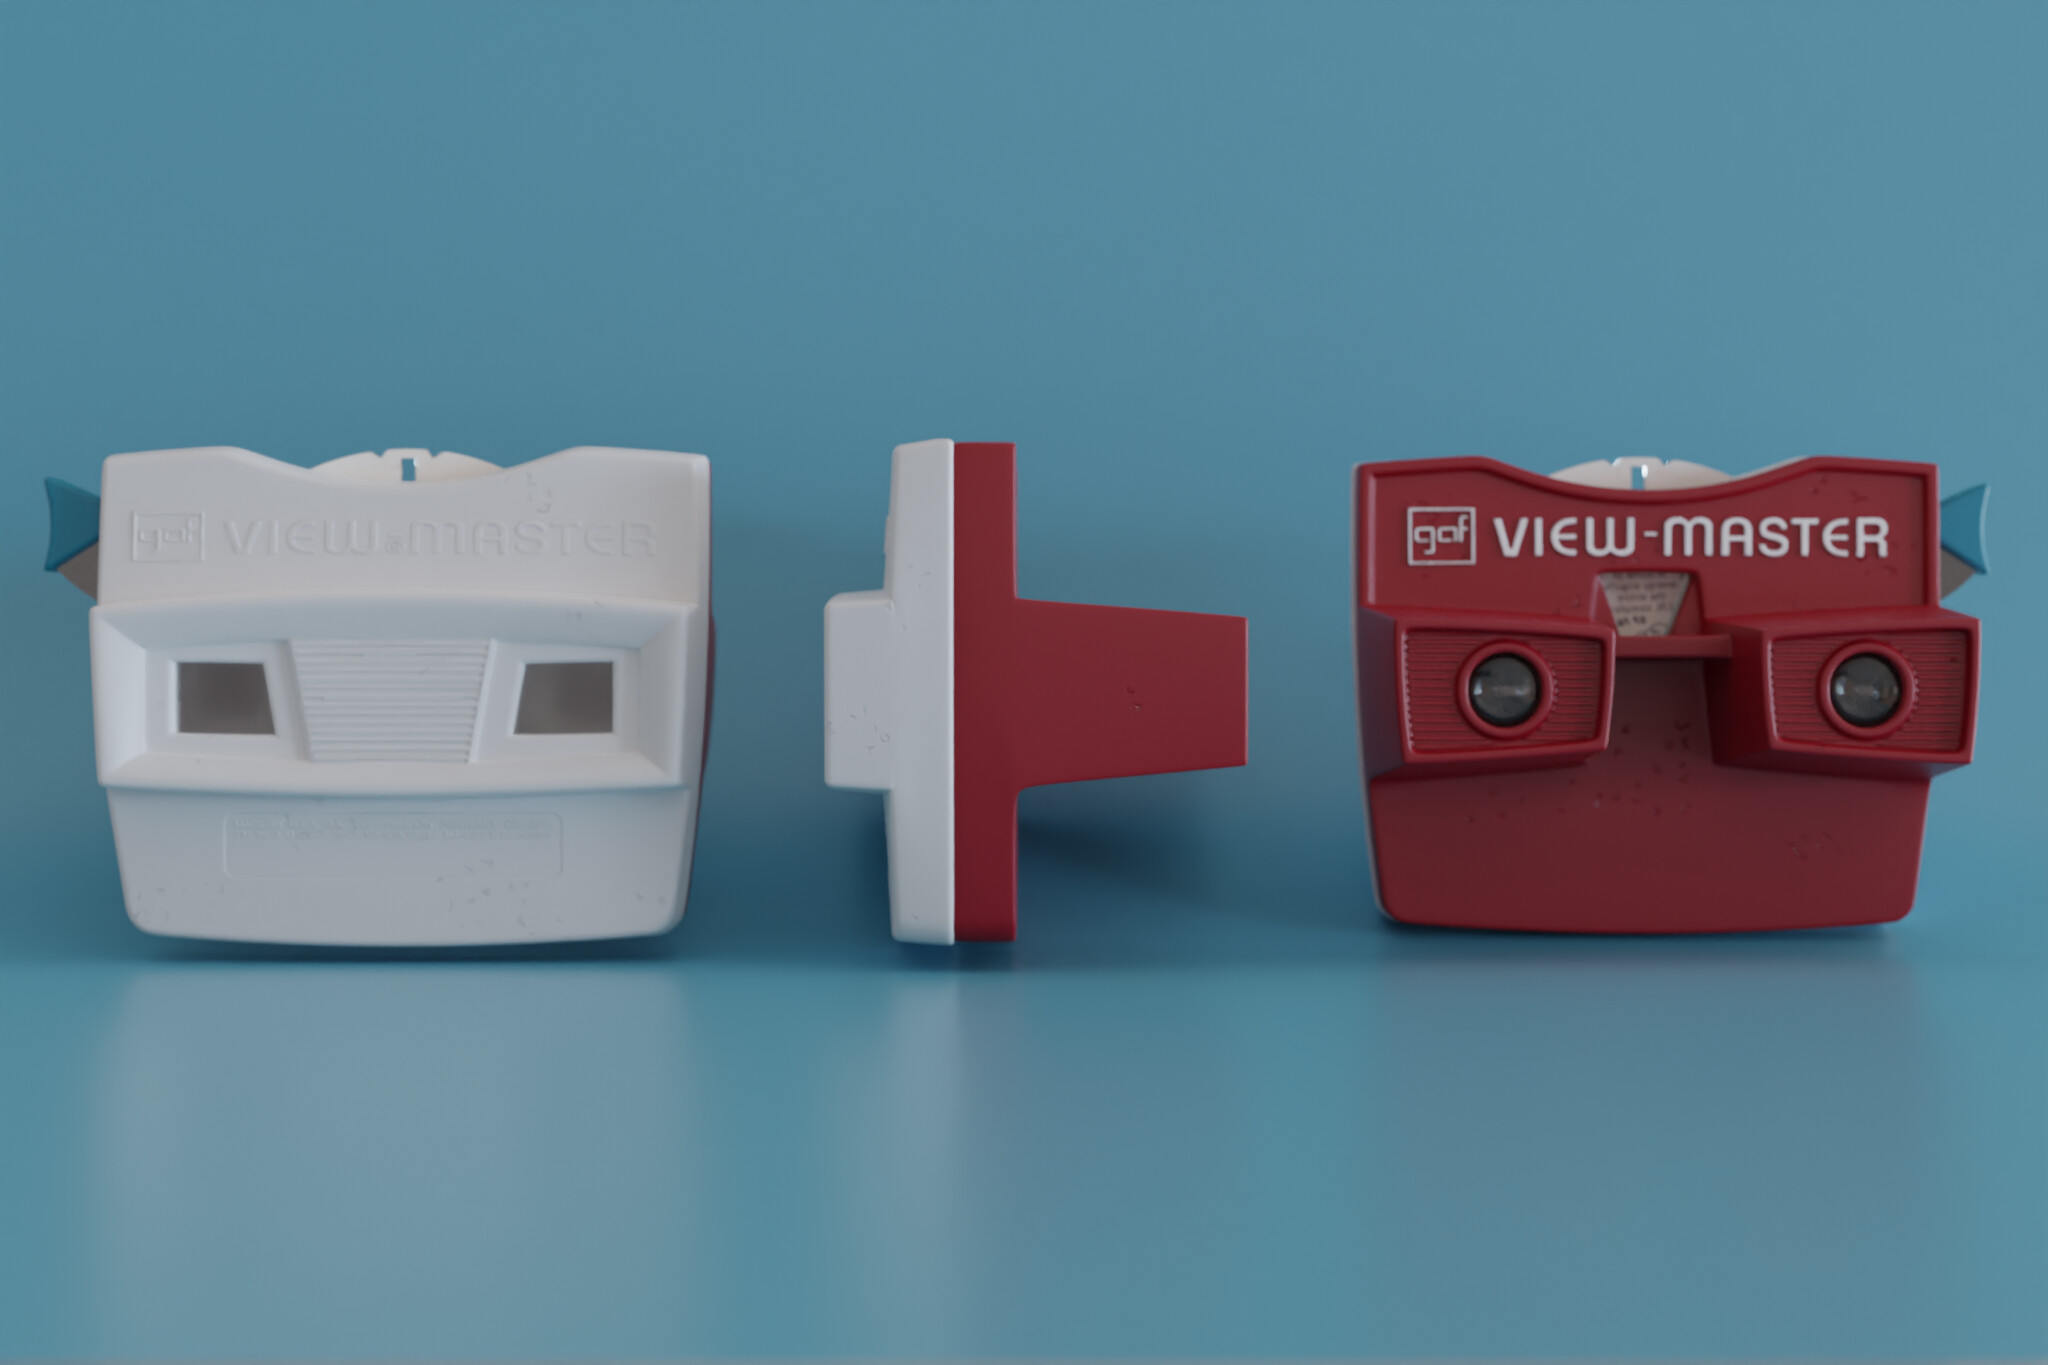 My View Master - Finished Projects - Blender Artists Community